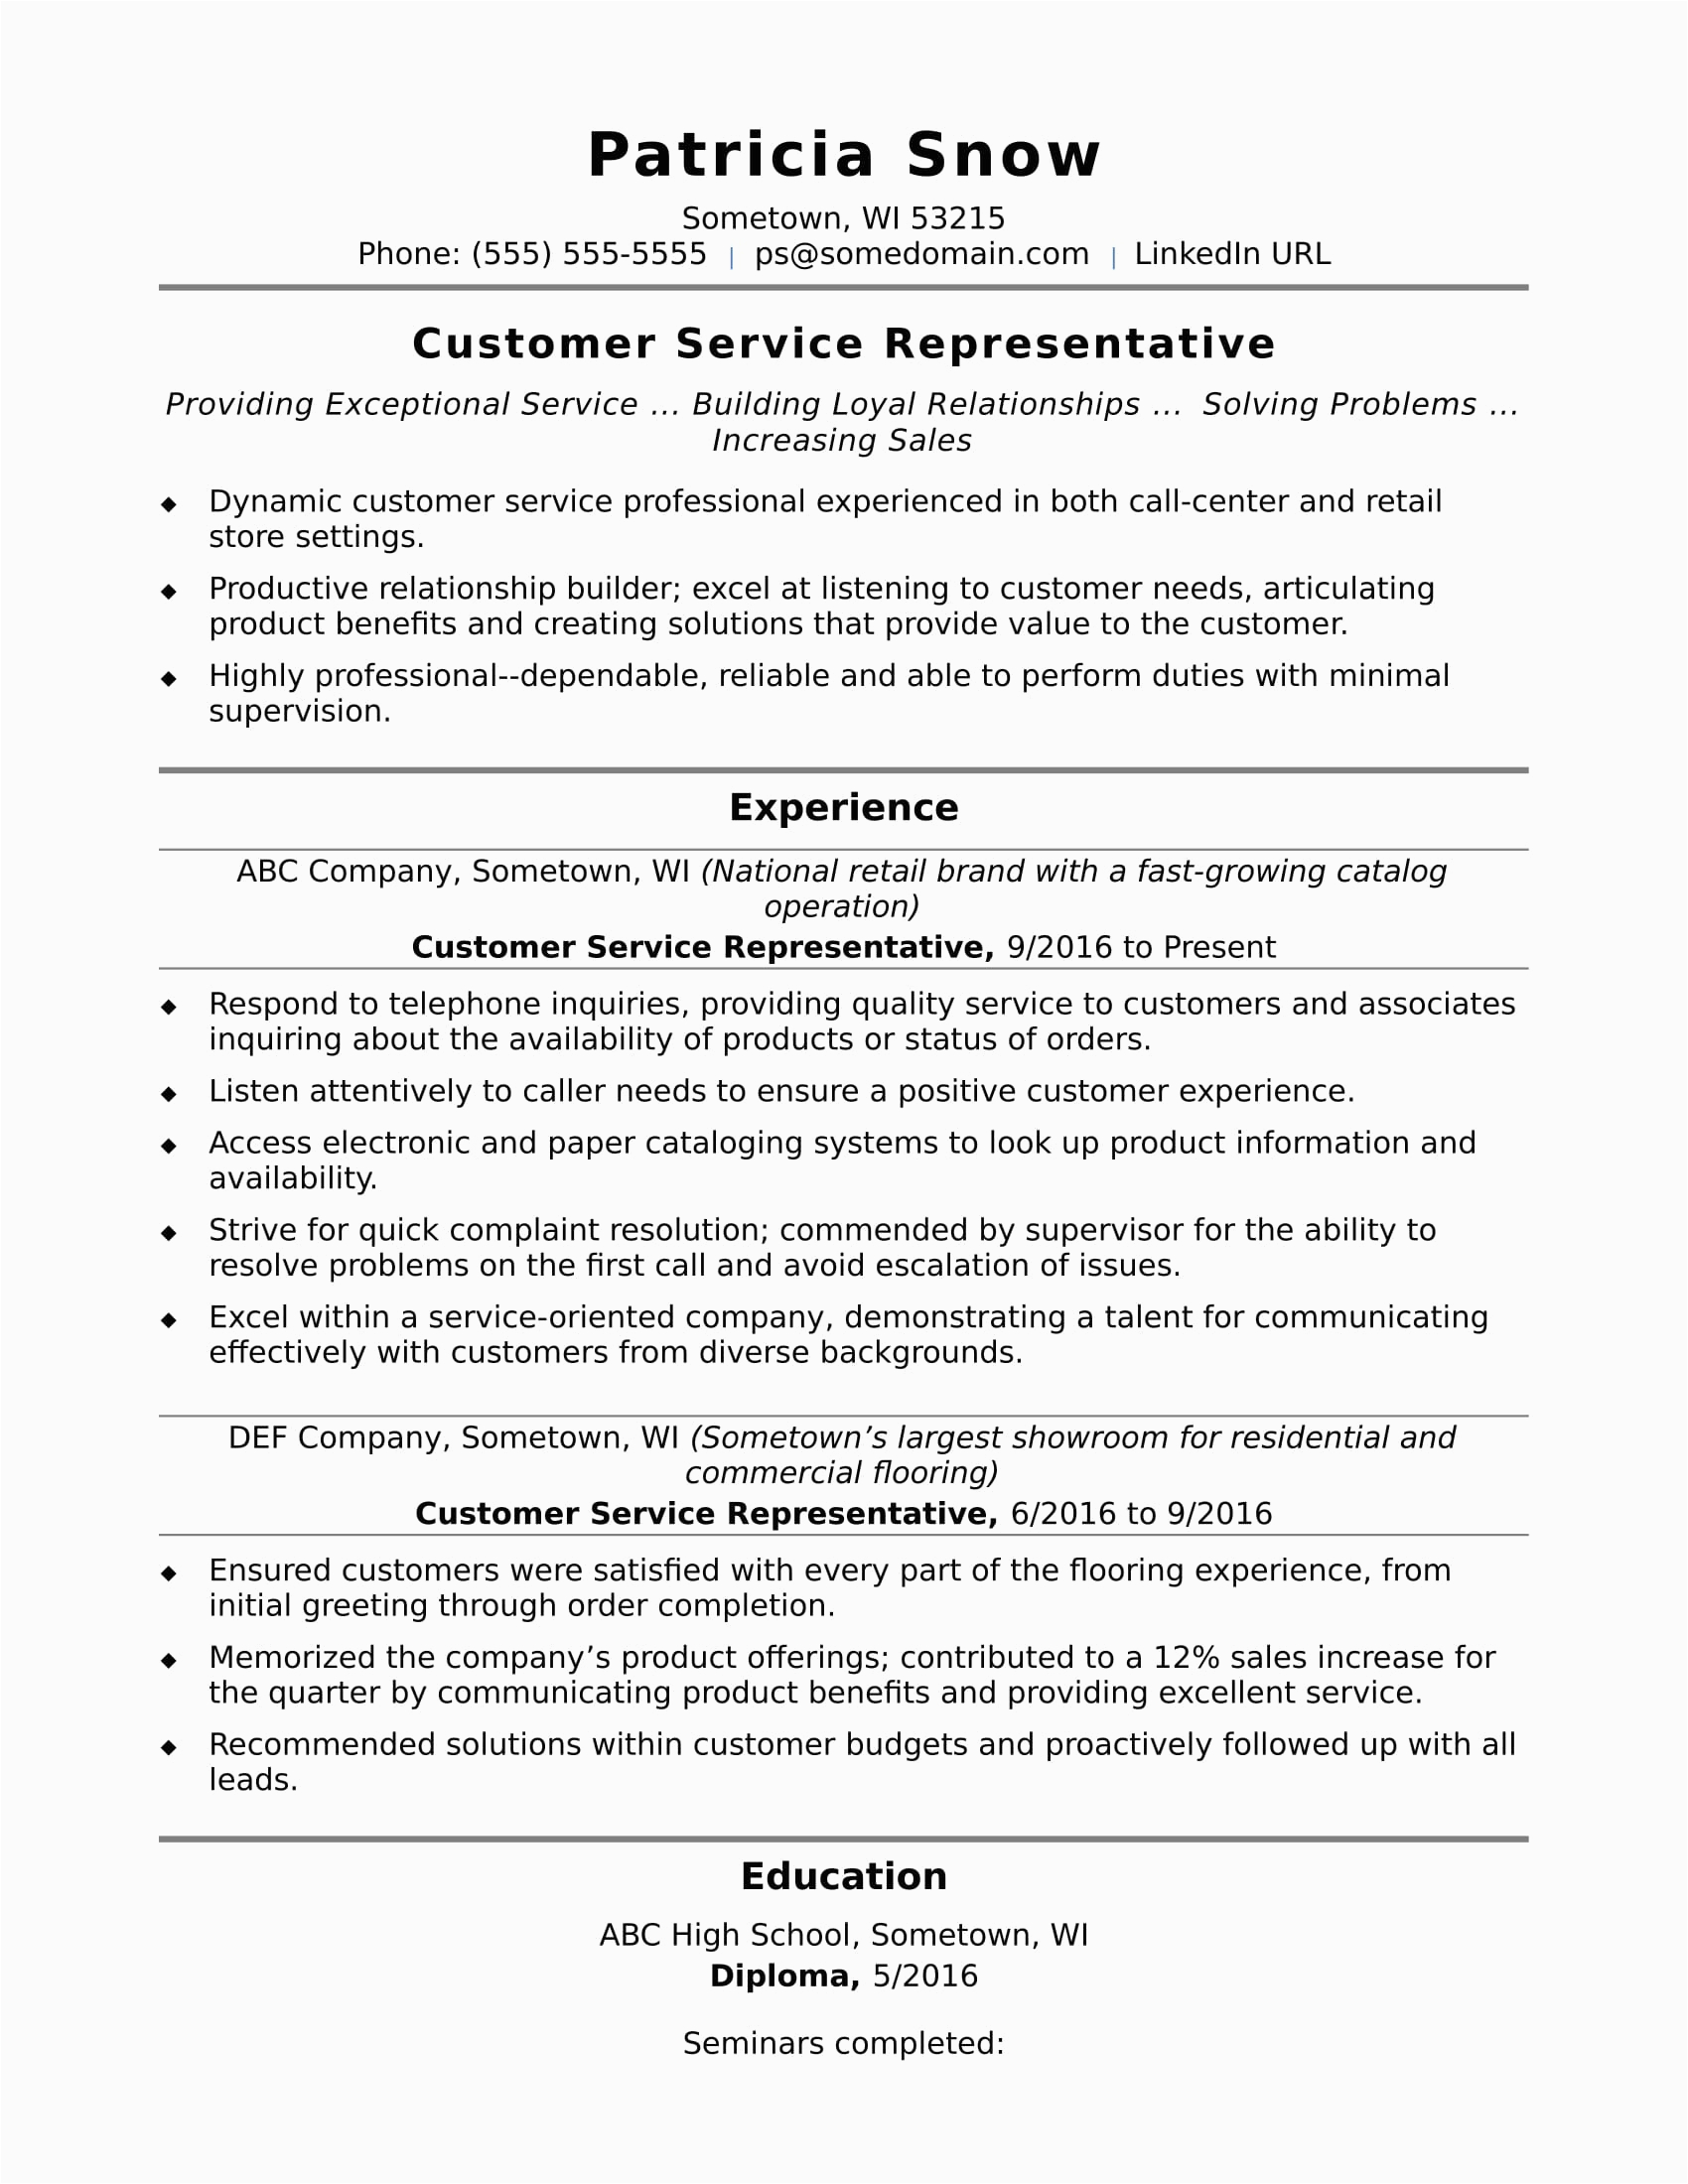 Resume Templates for Customer Service Position Customer Service Representative Resume Sample